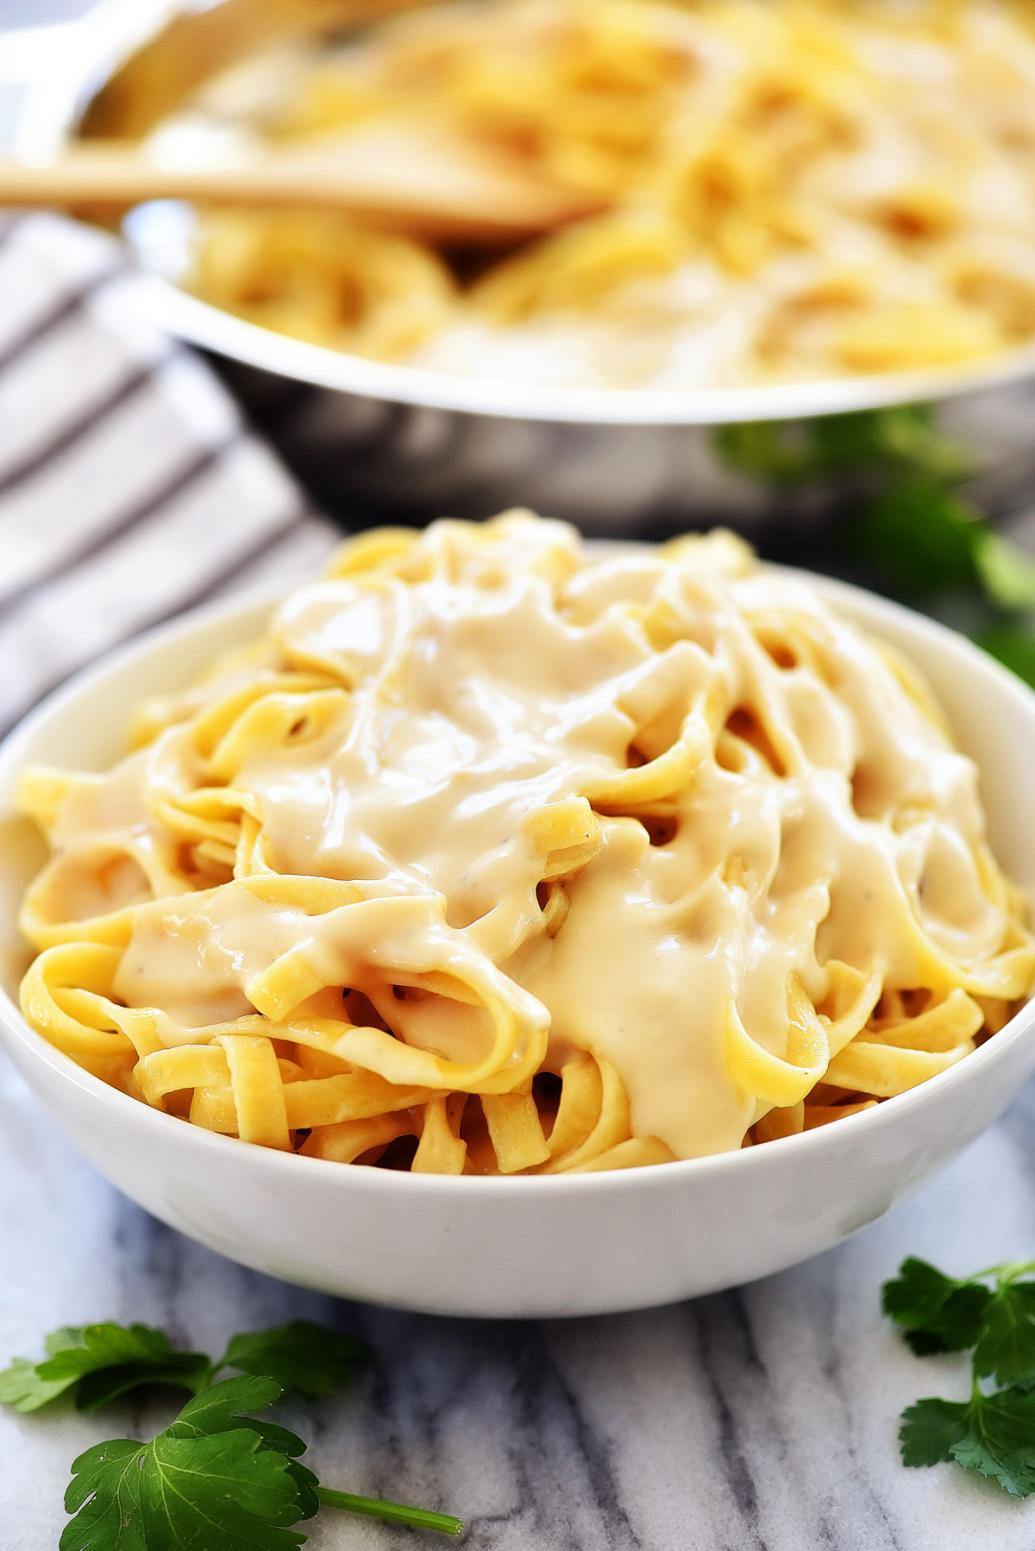 What Are the Key Differences Between Fettuccine and Other Types of Pasta?